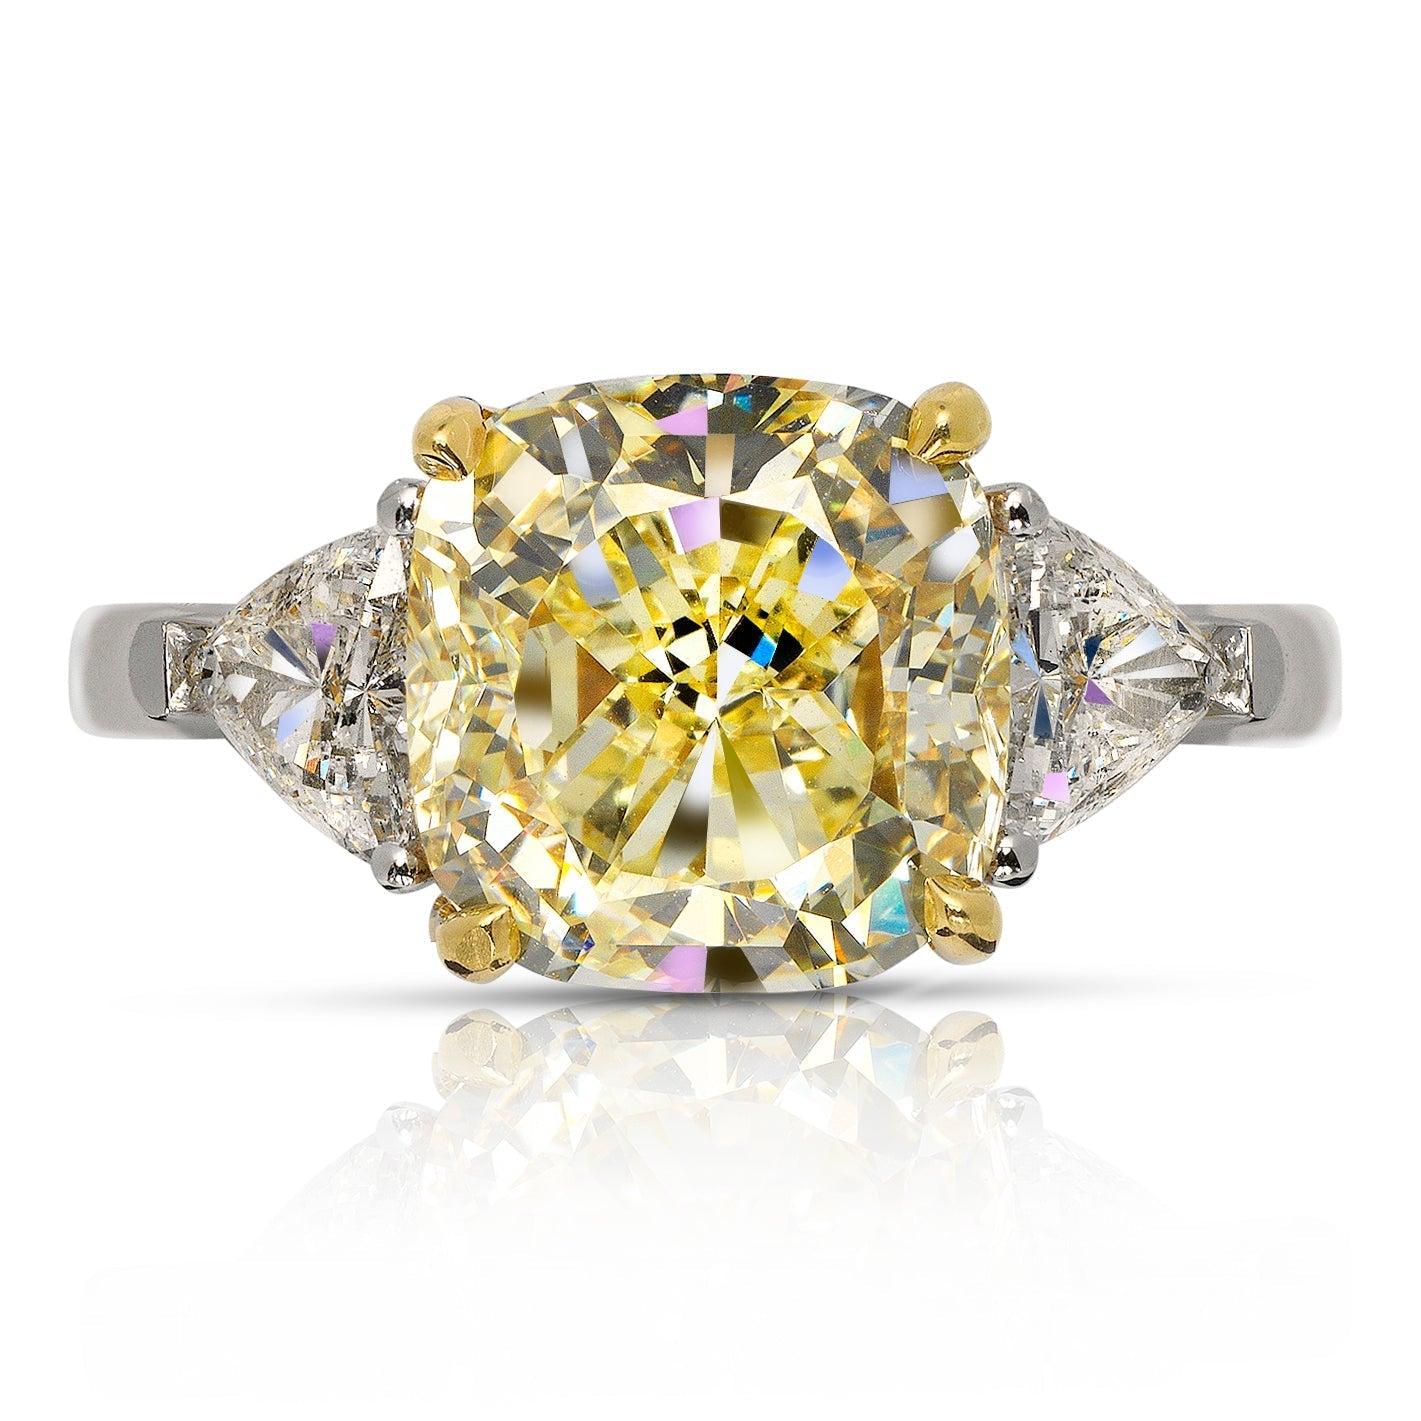 TOHIL- CUSHION CUT THREE STONE TRILLION FANCY YELLOW DIAMOND ENGAGEMENT RING BY MIKE NEKTA
GIA CERTIFIED
Center Diamond:
Carat Weight: 4 Carats
Color: NATURAL FANCY YELLOW 
Clarity: VS1
Style: CUSHION MODIFIED BRILLIANT
Approximate Measurements: 9.2